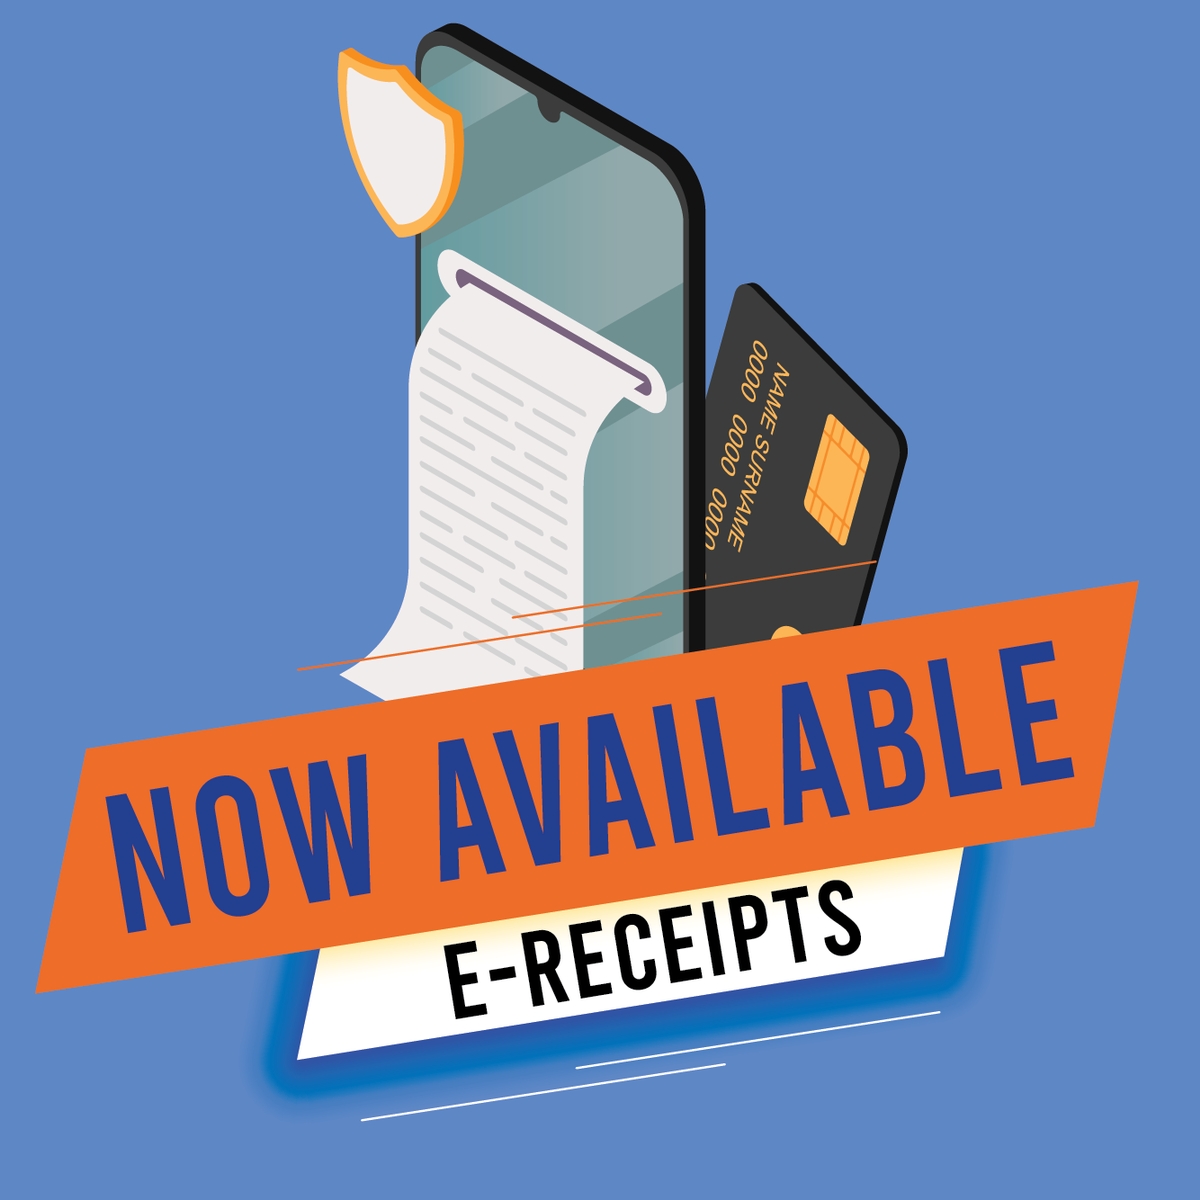 New E-Receipts Have Arrived!